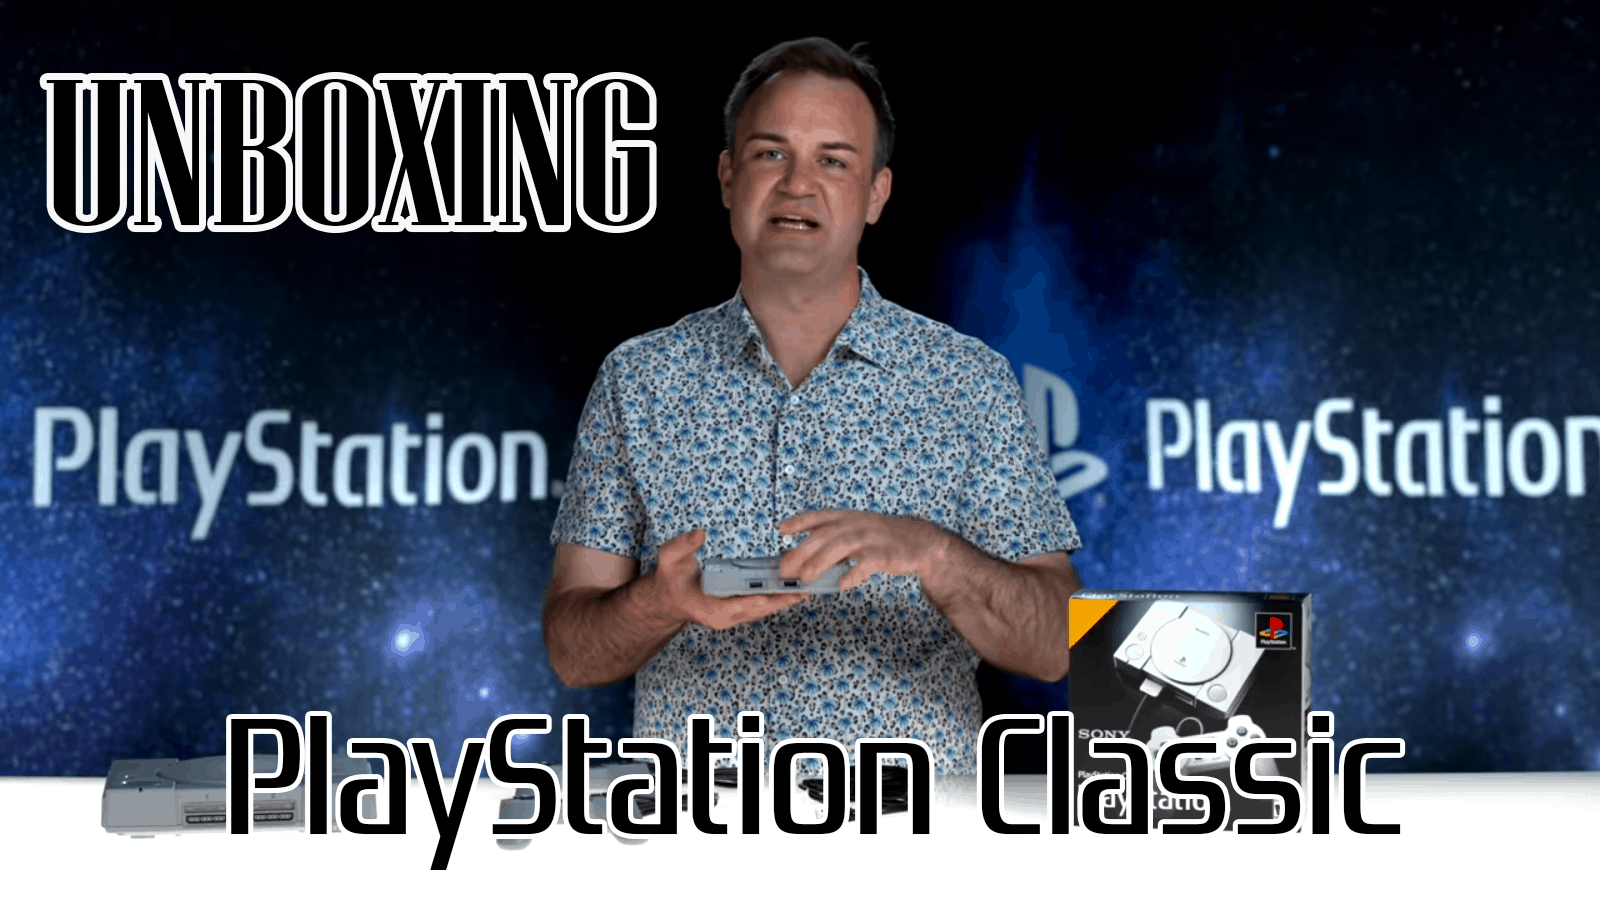 Unboxing playstation classic